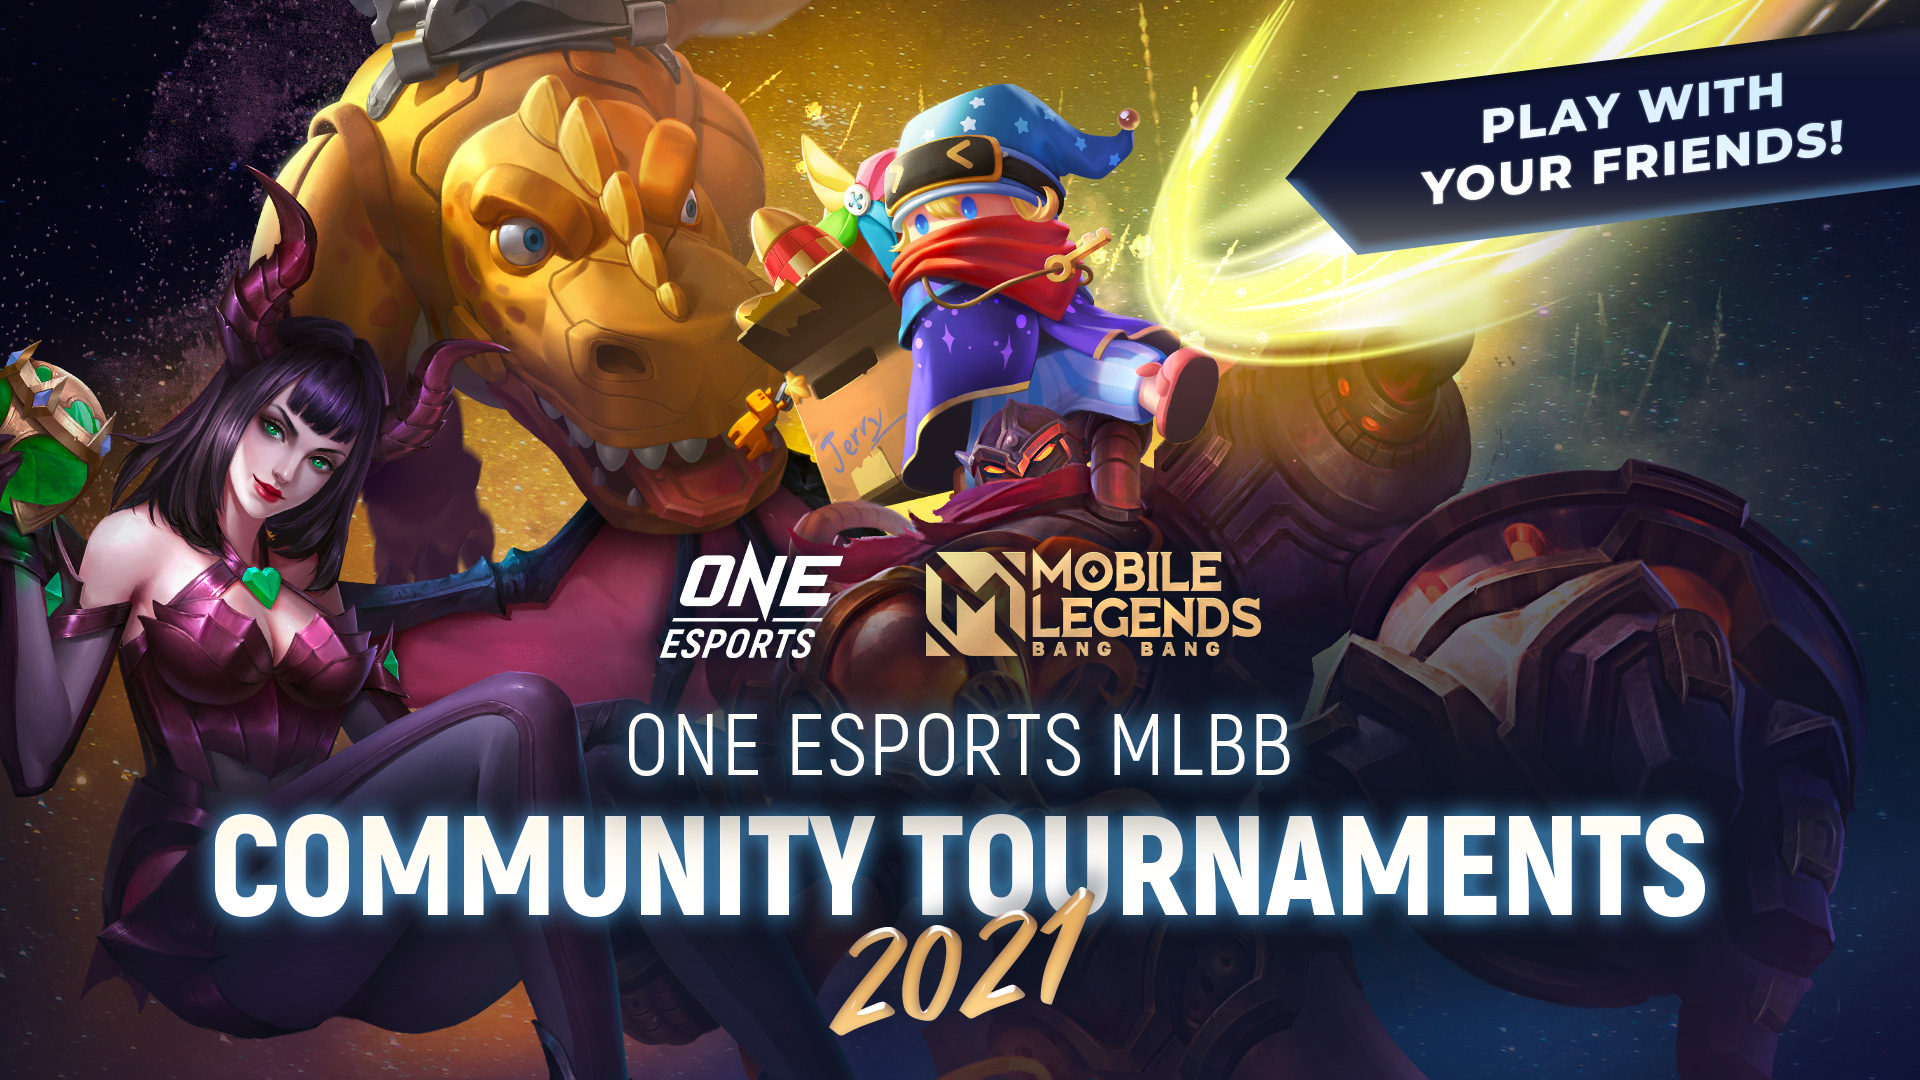 Join ONE Esports Community Tournaments and win cash prizes